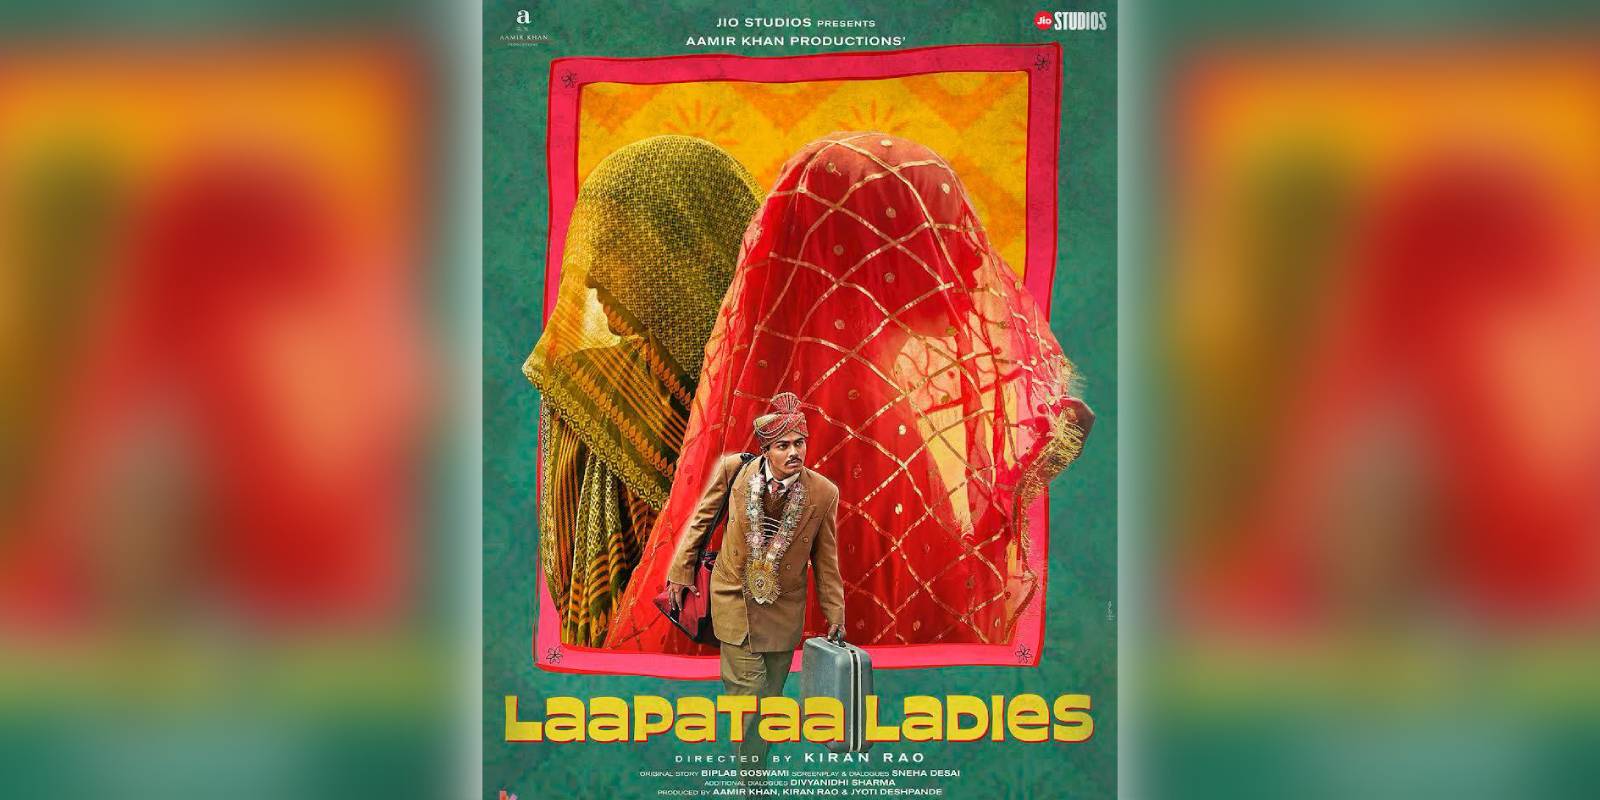 A poster of the film Laapataa Ladies